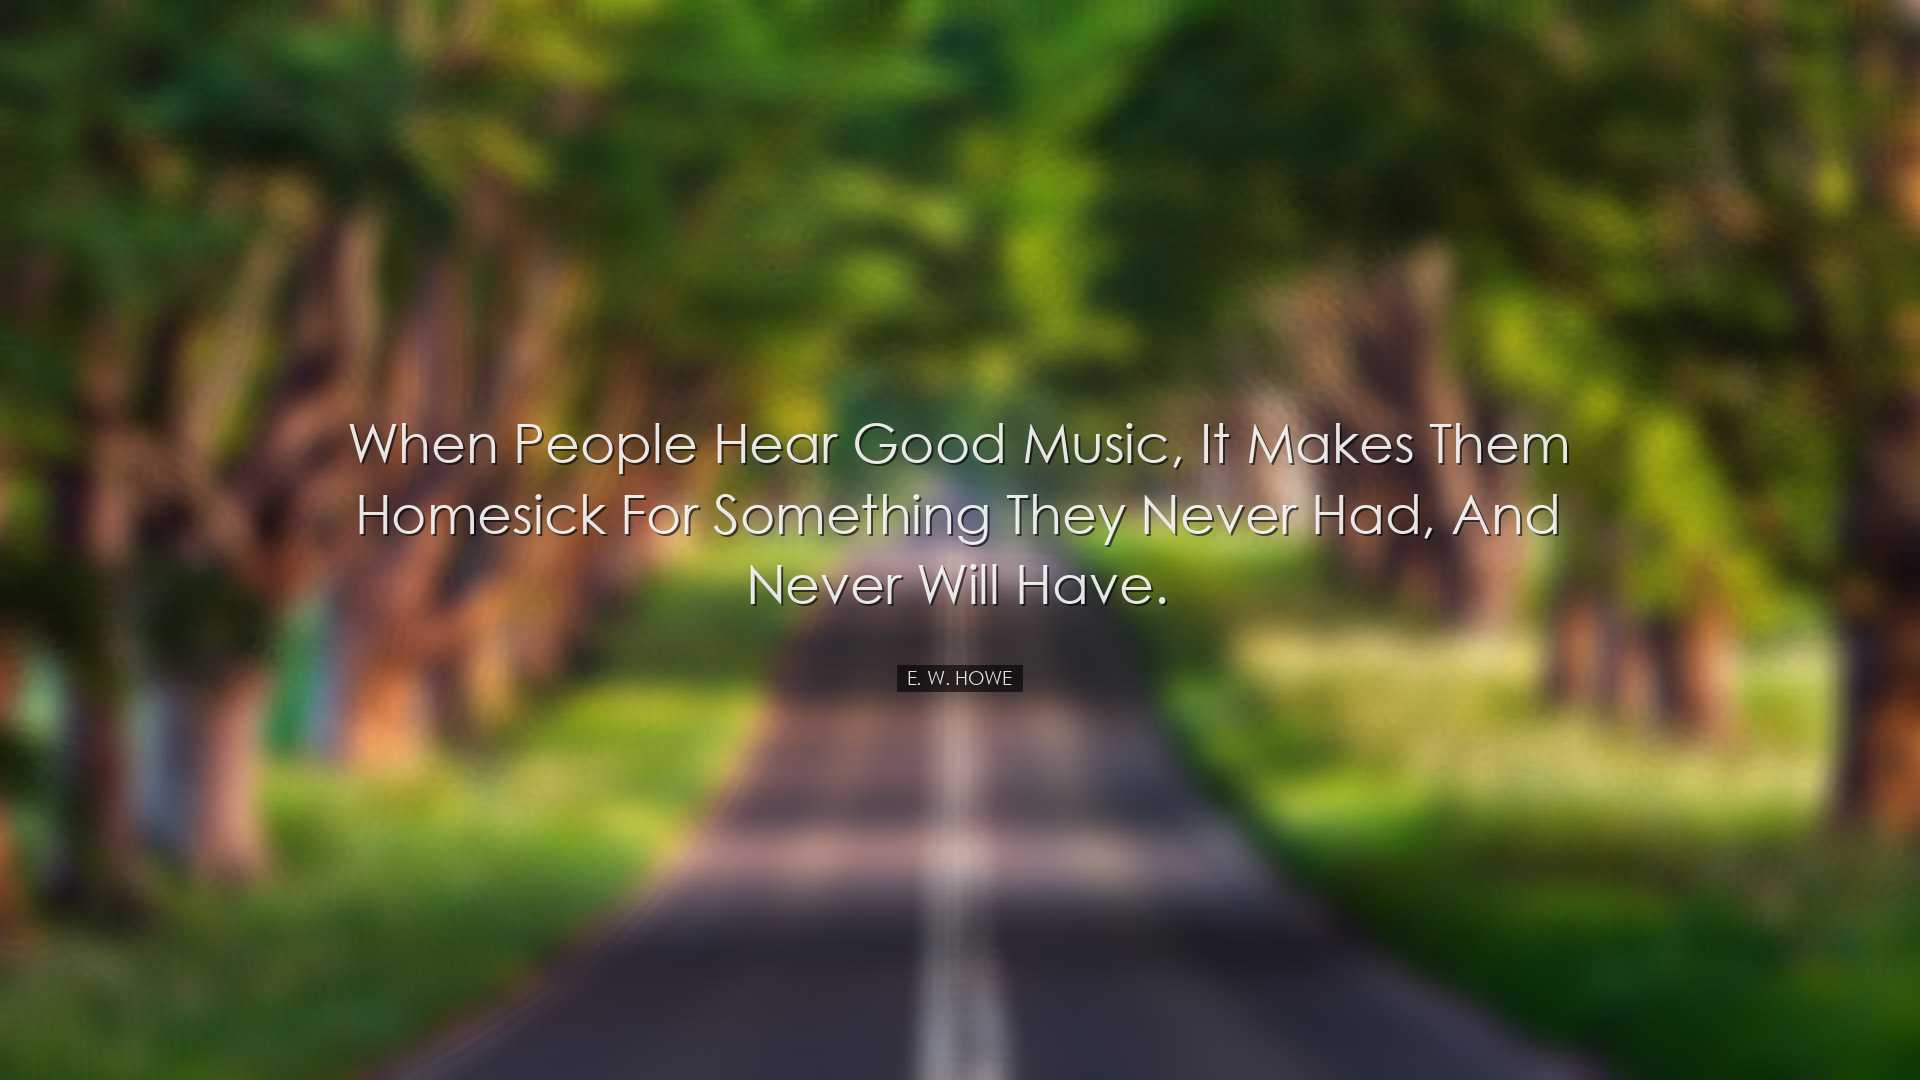 When people hear good music, it makes them homesick for something